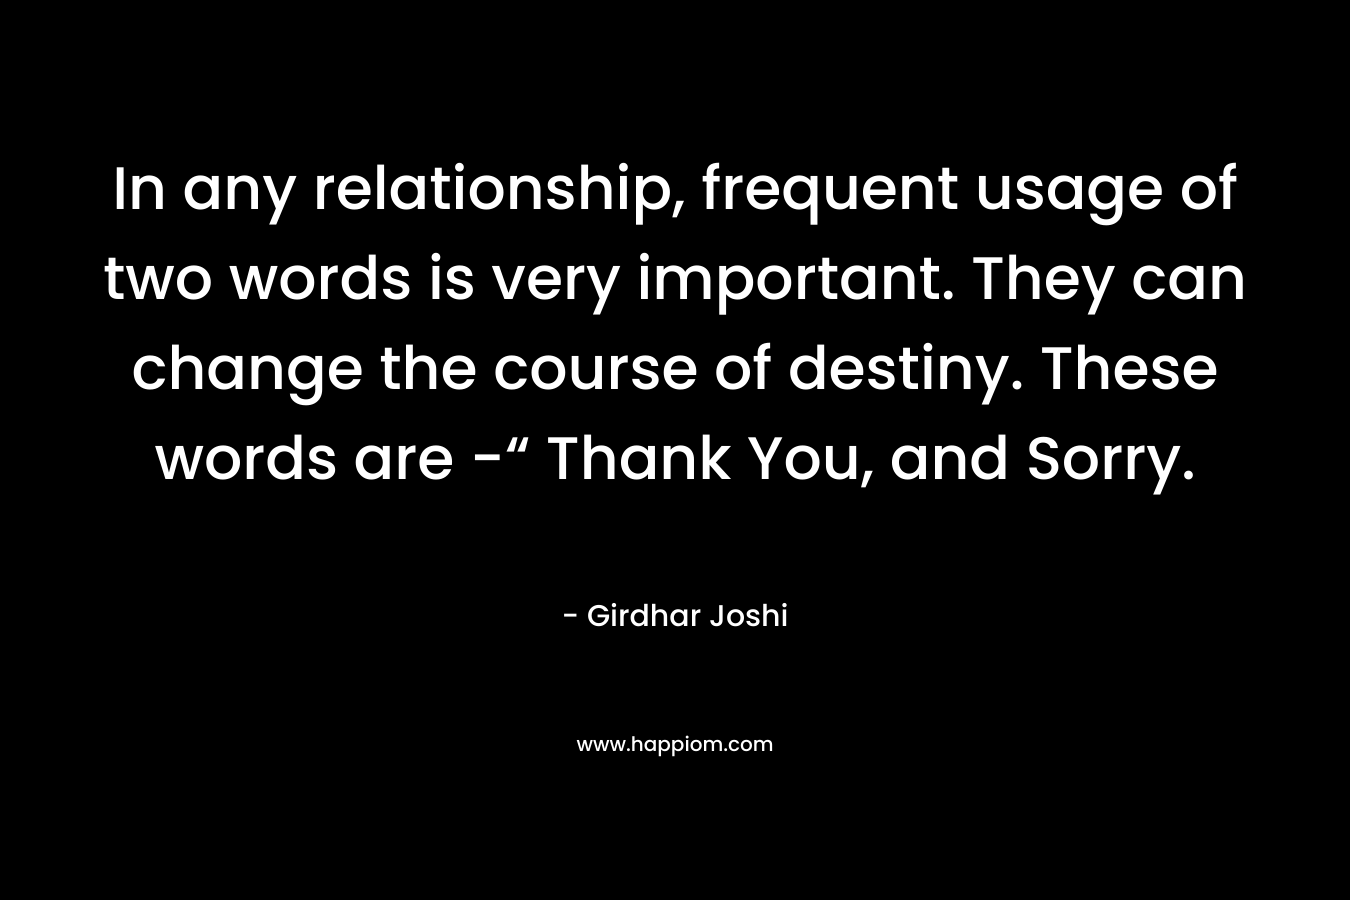 In any relationship, frequent usage of two words is very important. They can change the course of destiny. These words are -“ Thank You, and Sorry. – Girdhar Joshi